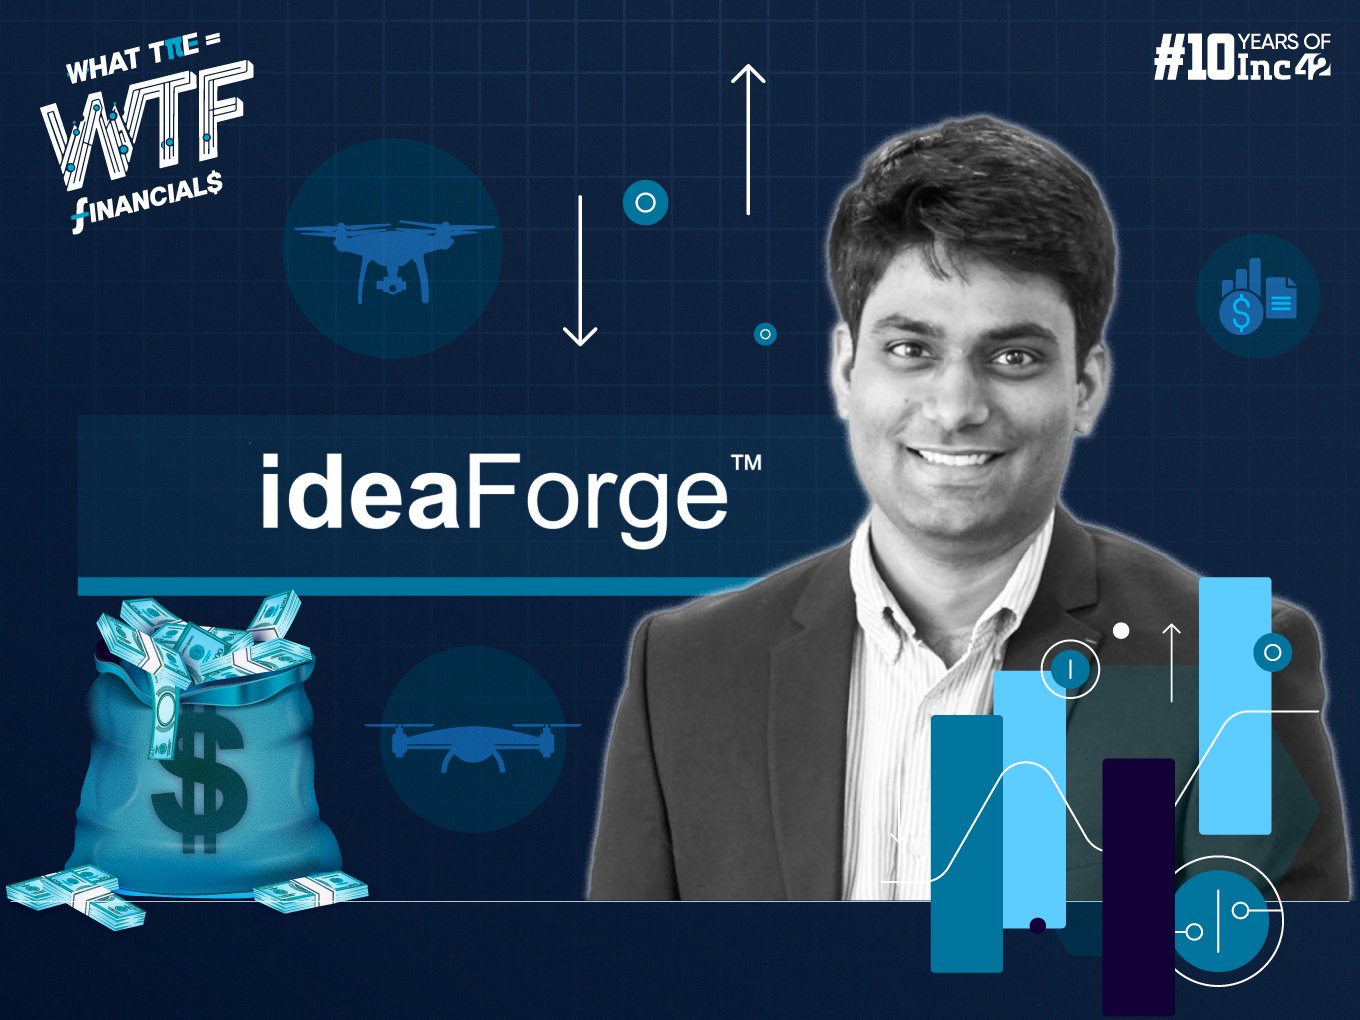 ideaForge PAT Slips 30% QoQ To INR 10.3 Cr In Q4